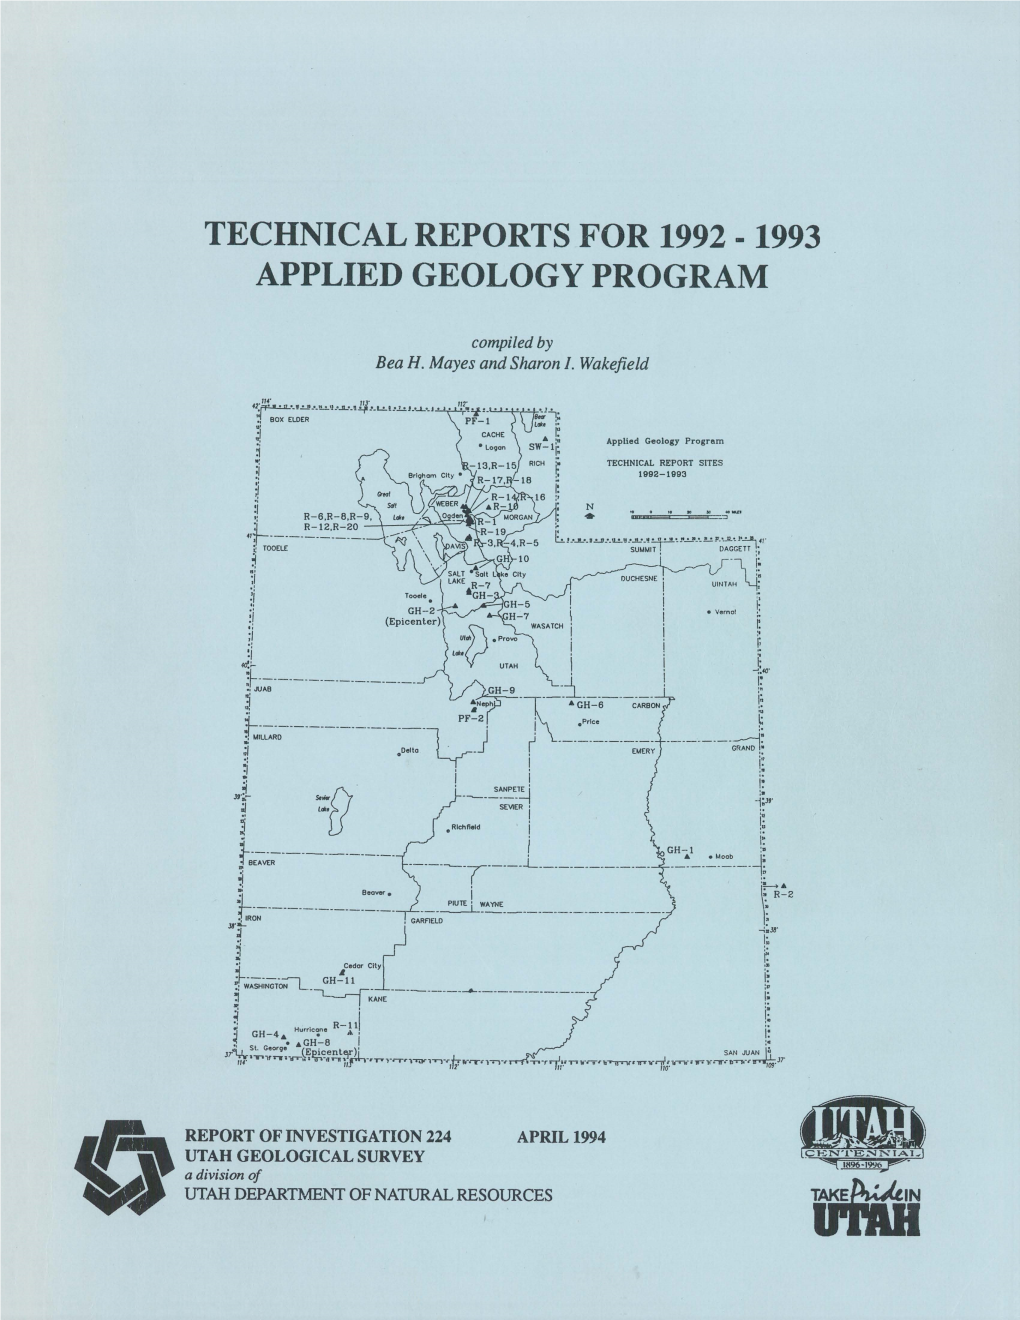 Technical Reports for 1992-1993 Applied Geology Program